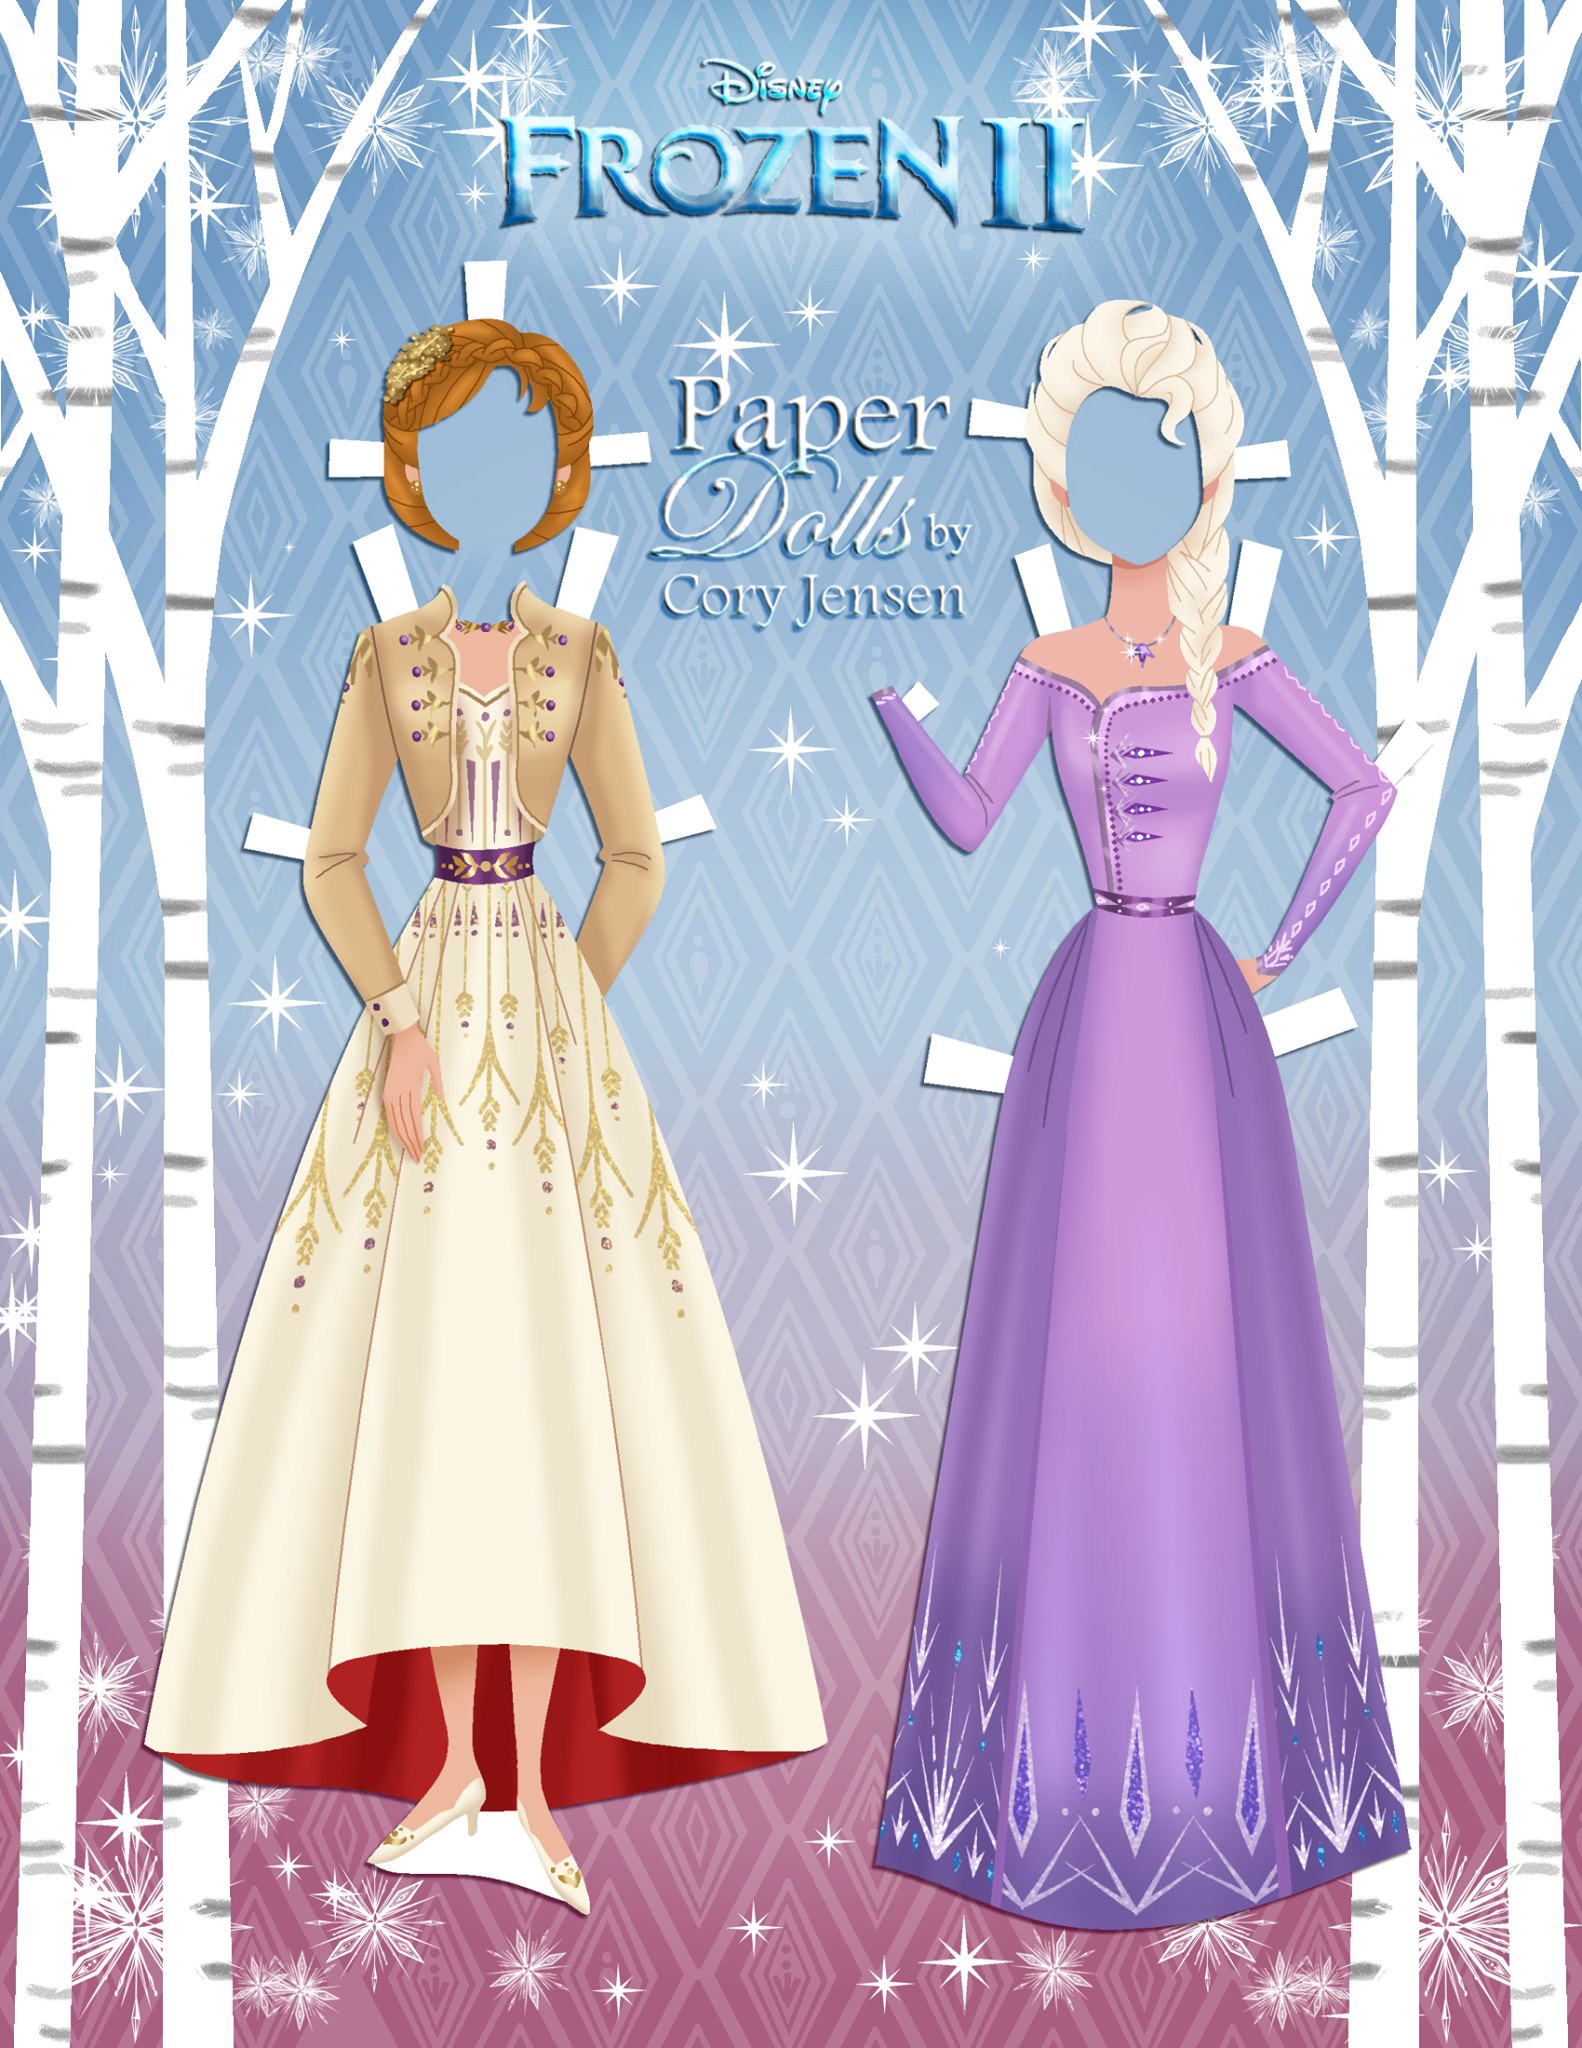 frozen 2 elsa and anna paper dolls with clothing and dresses from the movie youloveit com